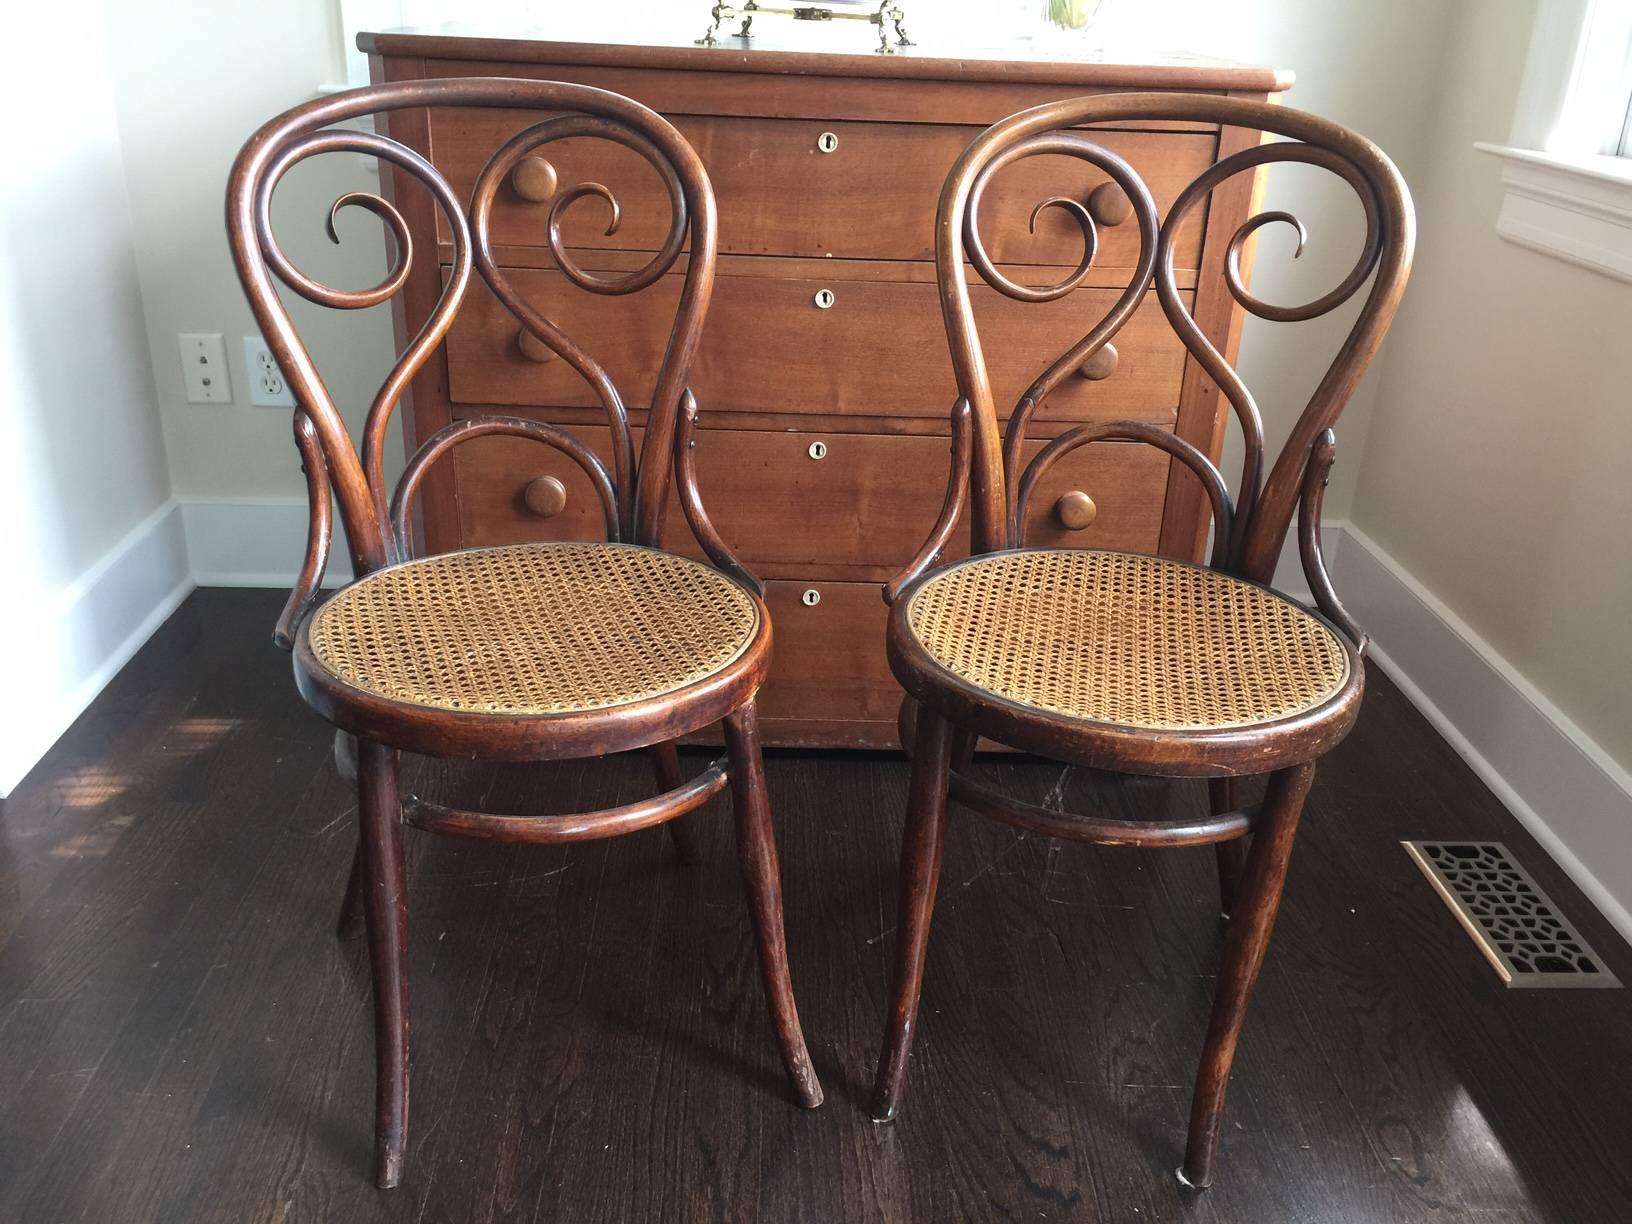 20th Century Set of Ten Turn-of-the-Century Bentwood Dining Chairs by Thonet